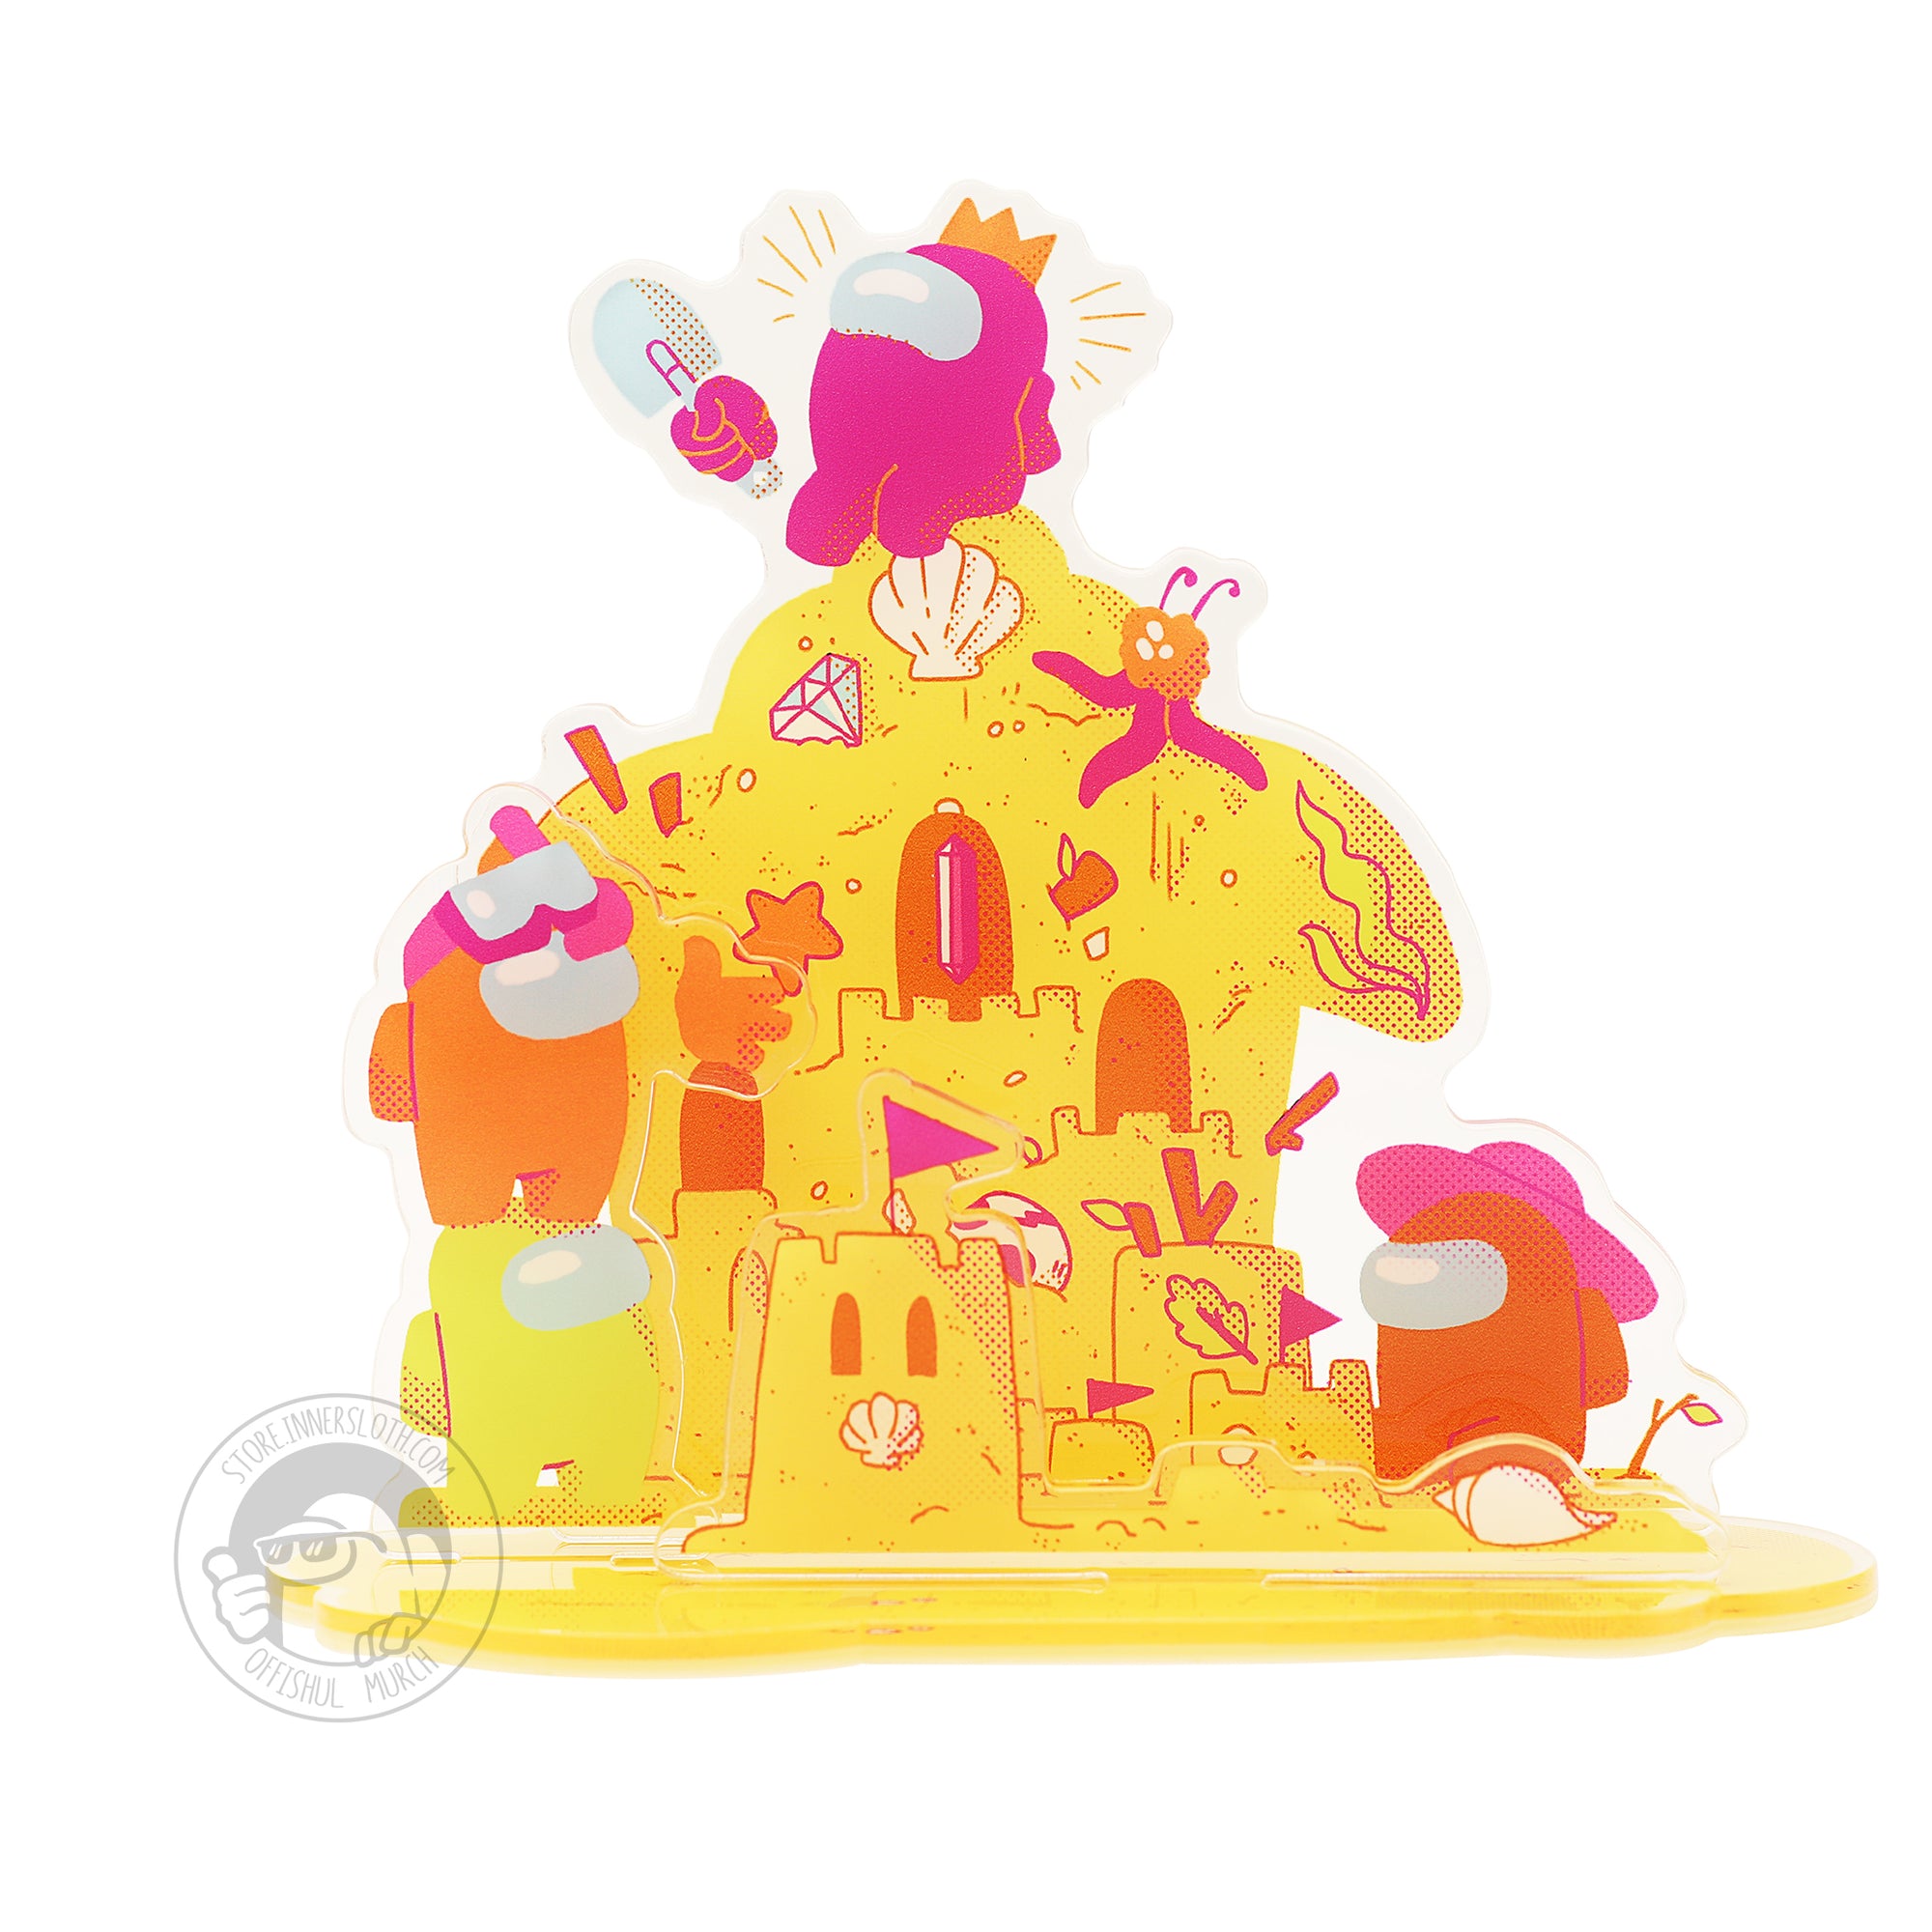 A product photo of the Among Us: Sandcastle Standee. It is an acrylic standee with different layers depicting a scene. The standee depicts four crewmates building a sandcastle, which vaguely resembles the Airship. A pink crewmate wearing a crown hat sits at the top of the castle. 